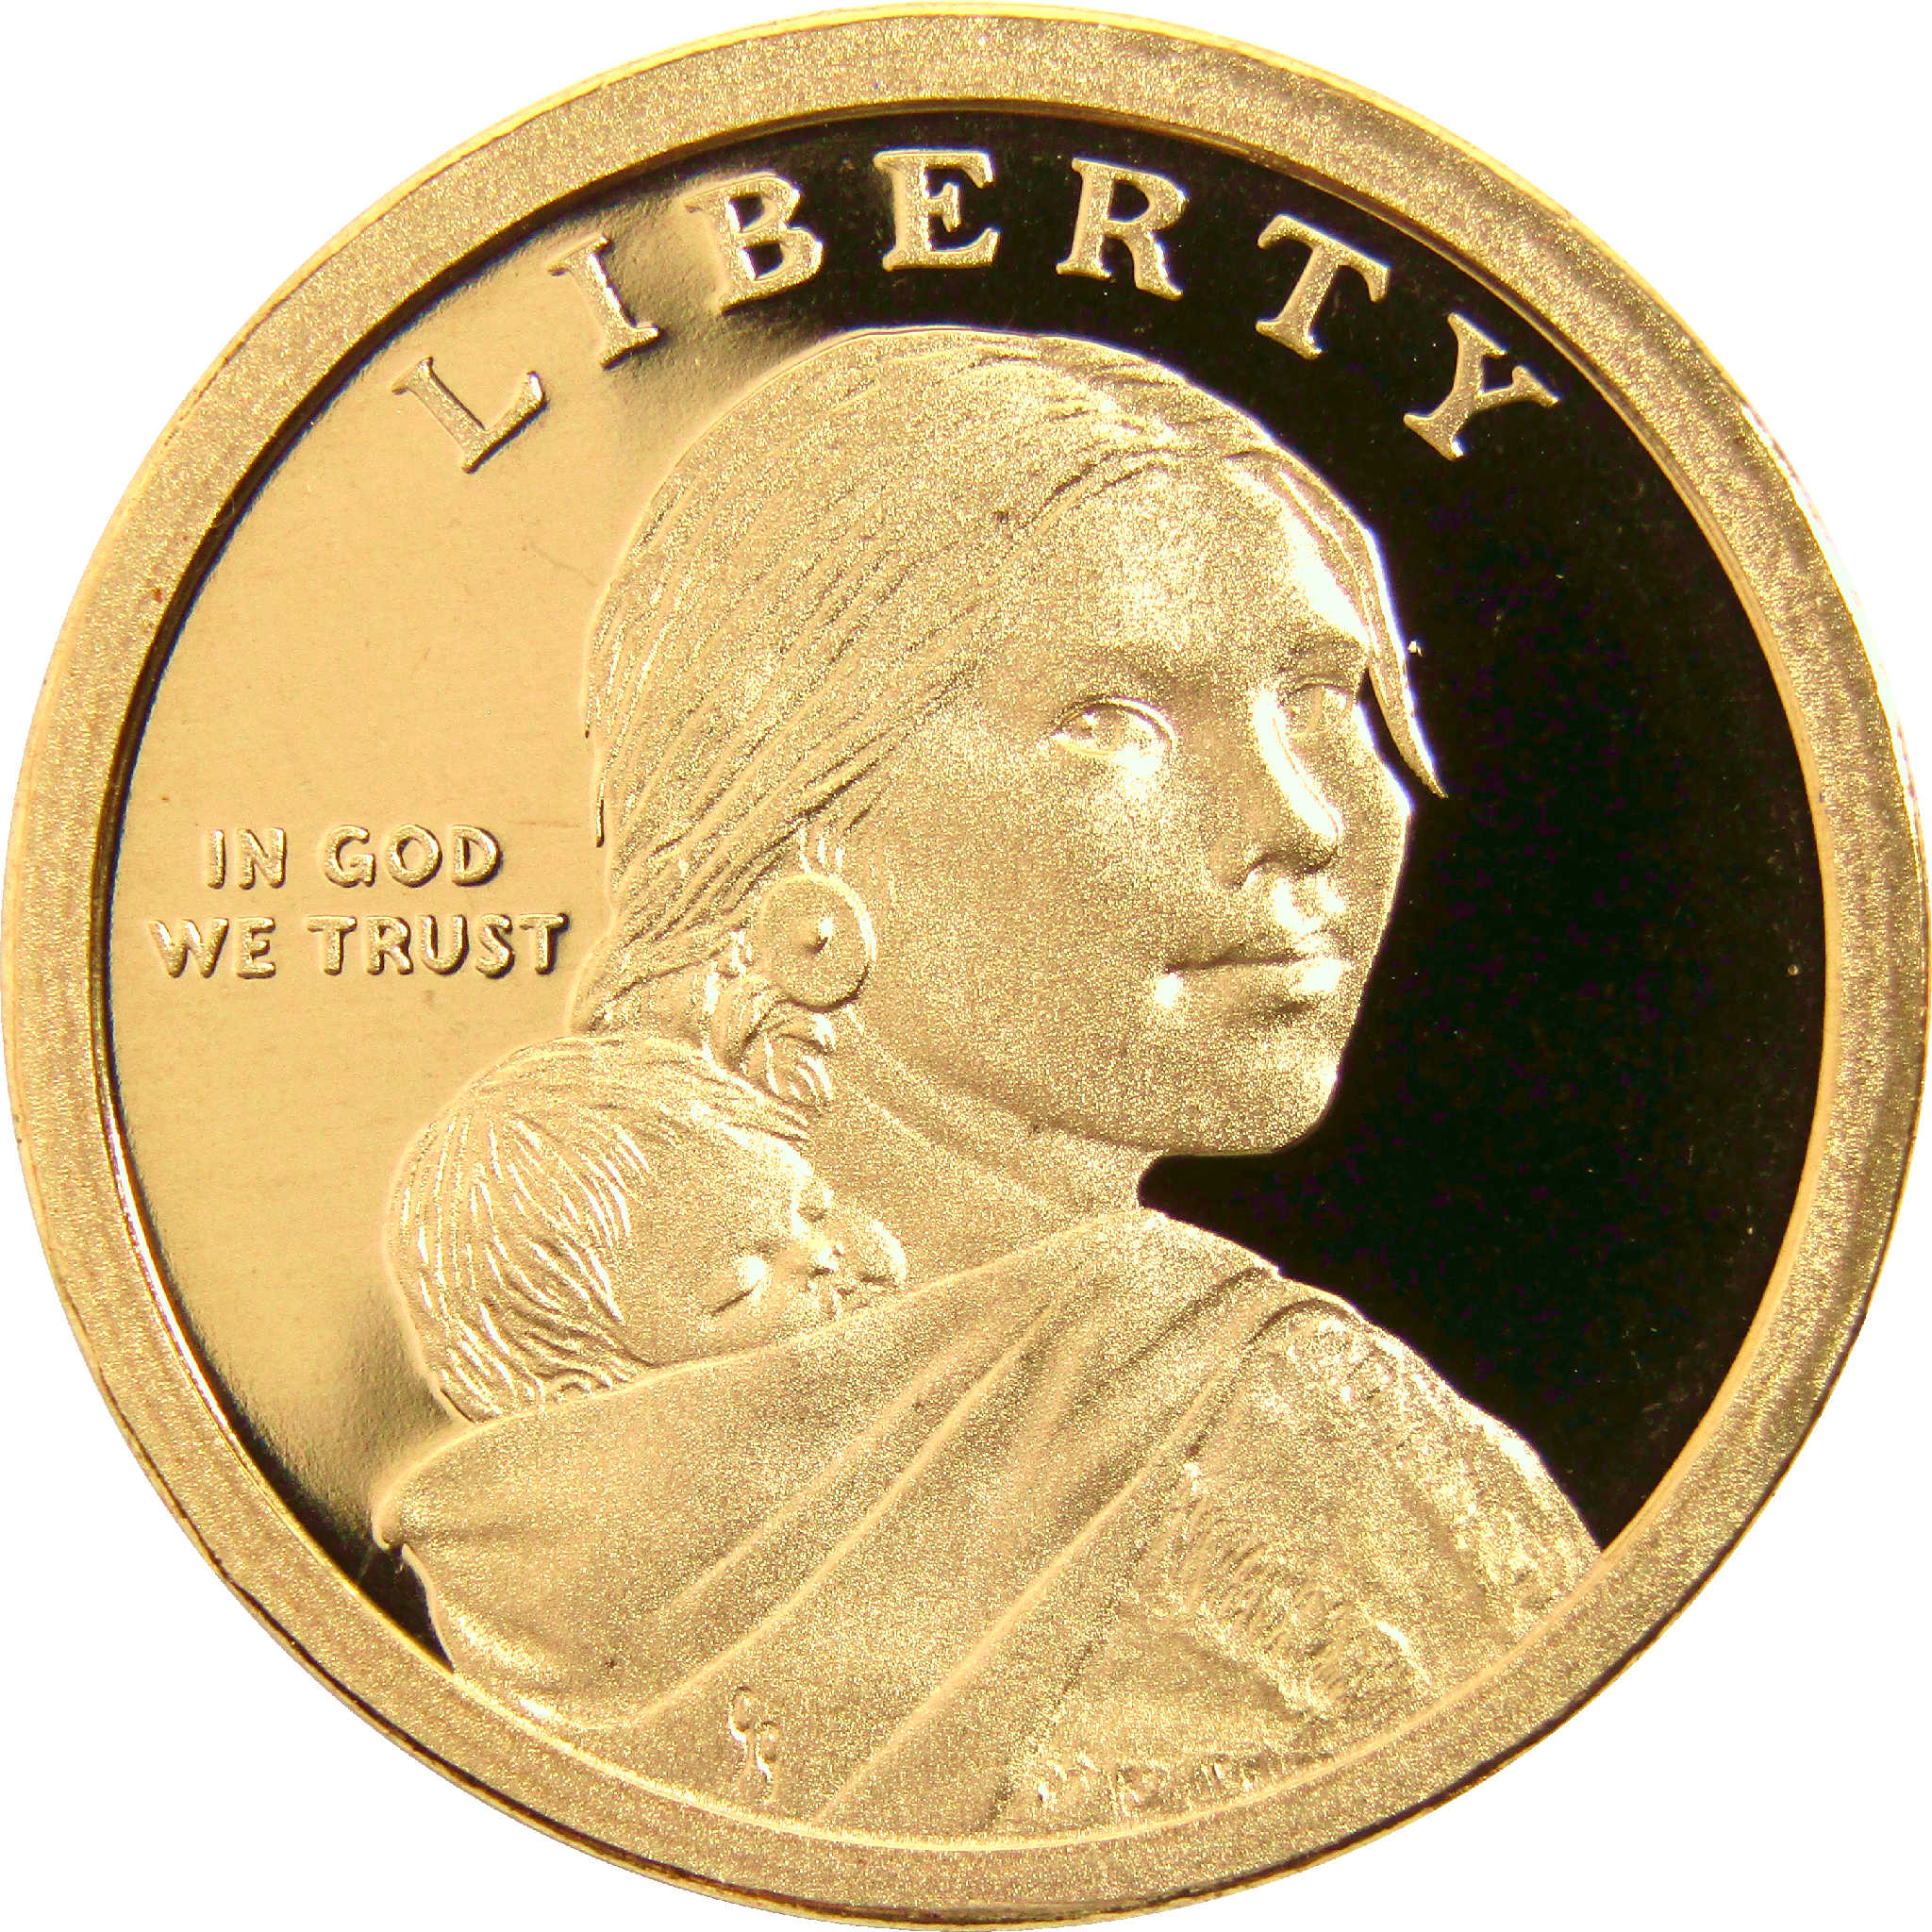 2013 S Treaty with the Delawares Native American Dollar Choice Proof